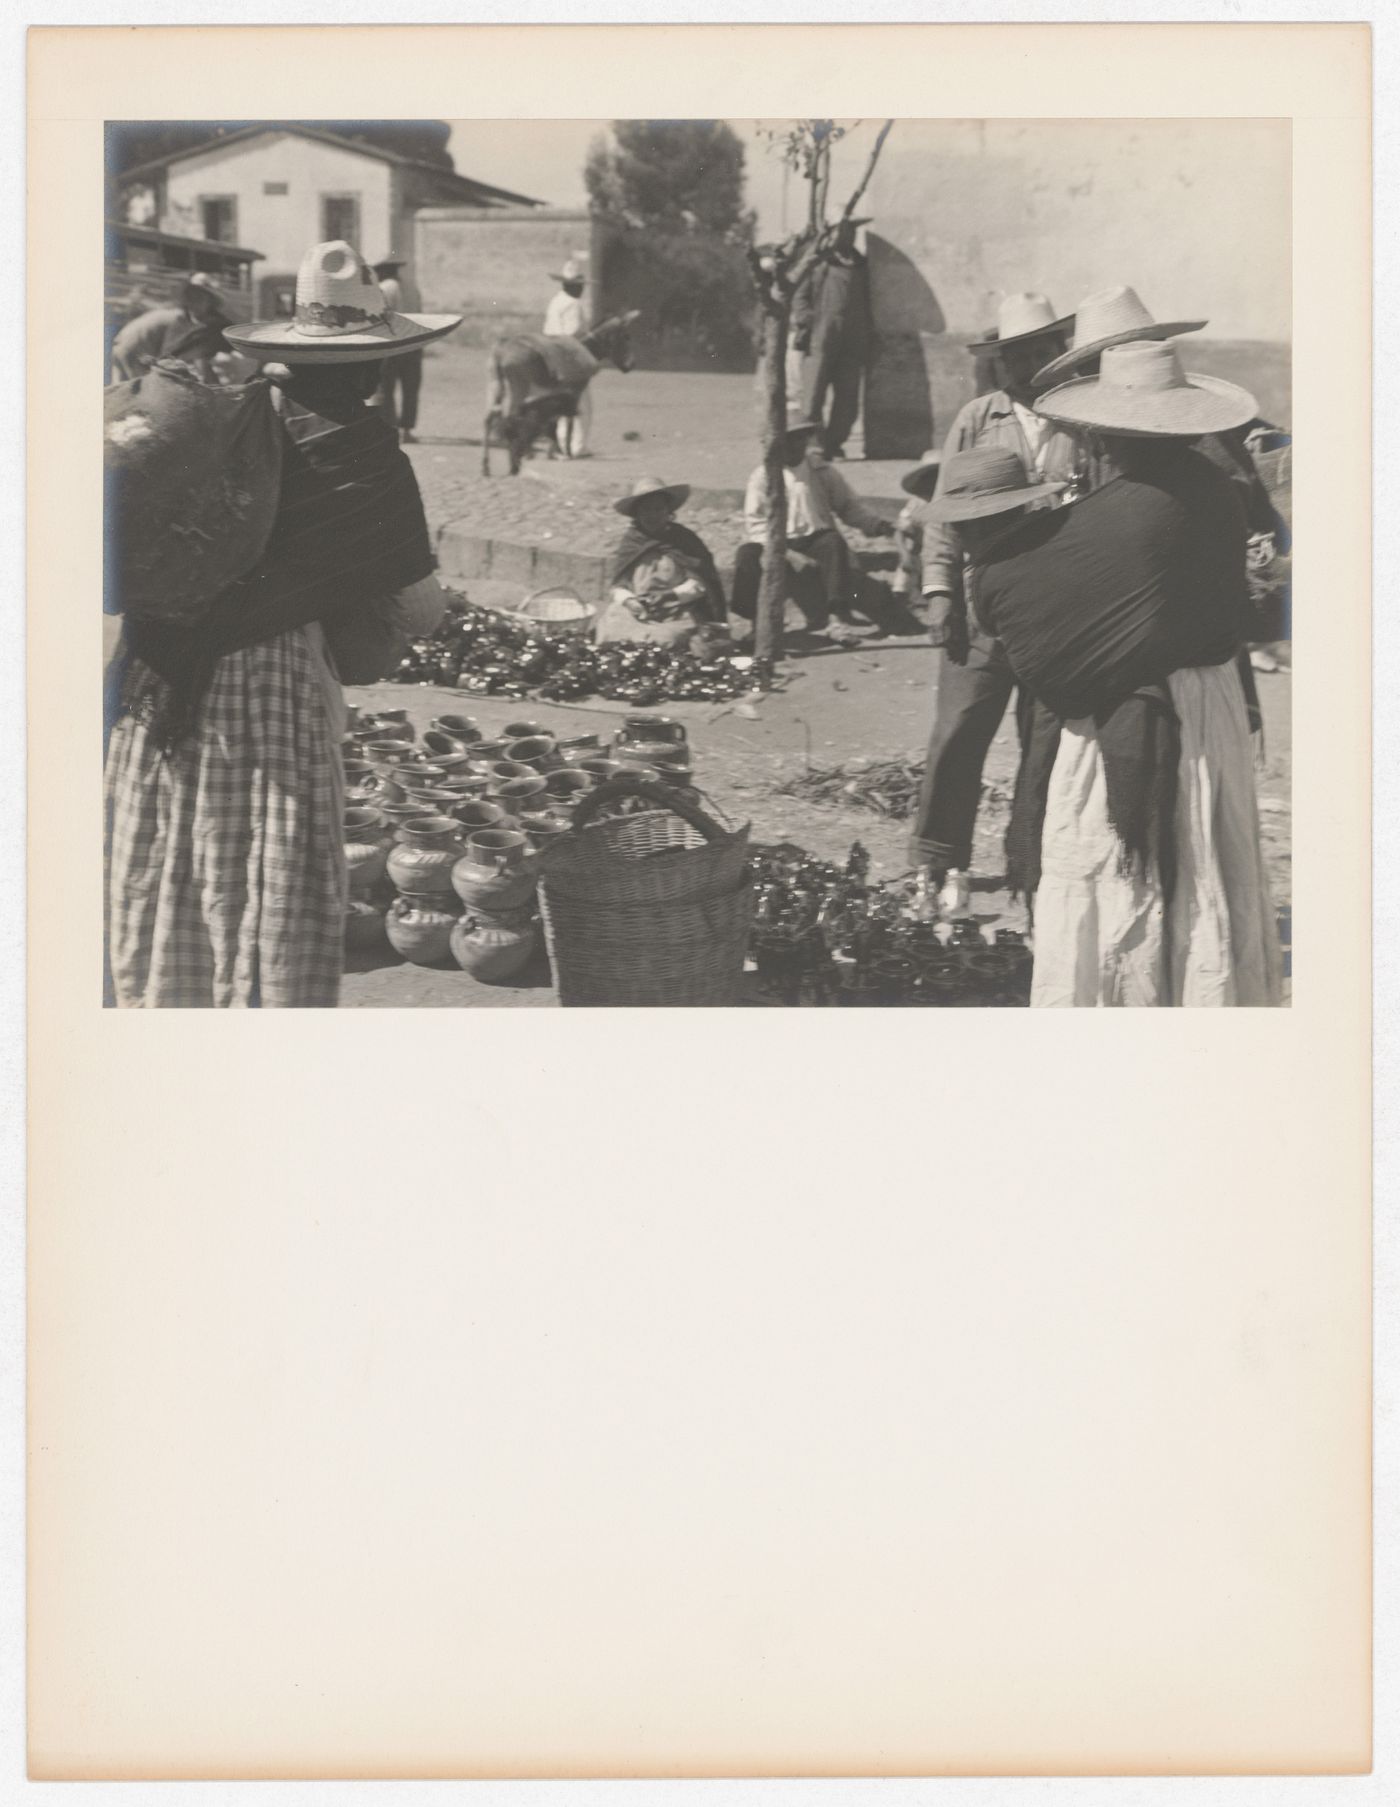 View of a market showing people and dishes, Metepec, Mexico